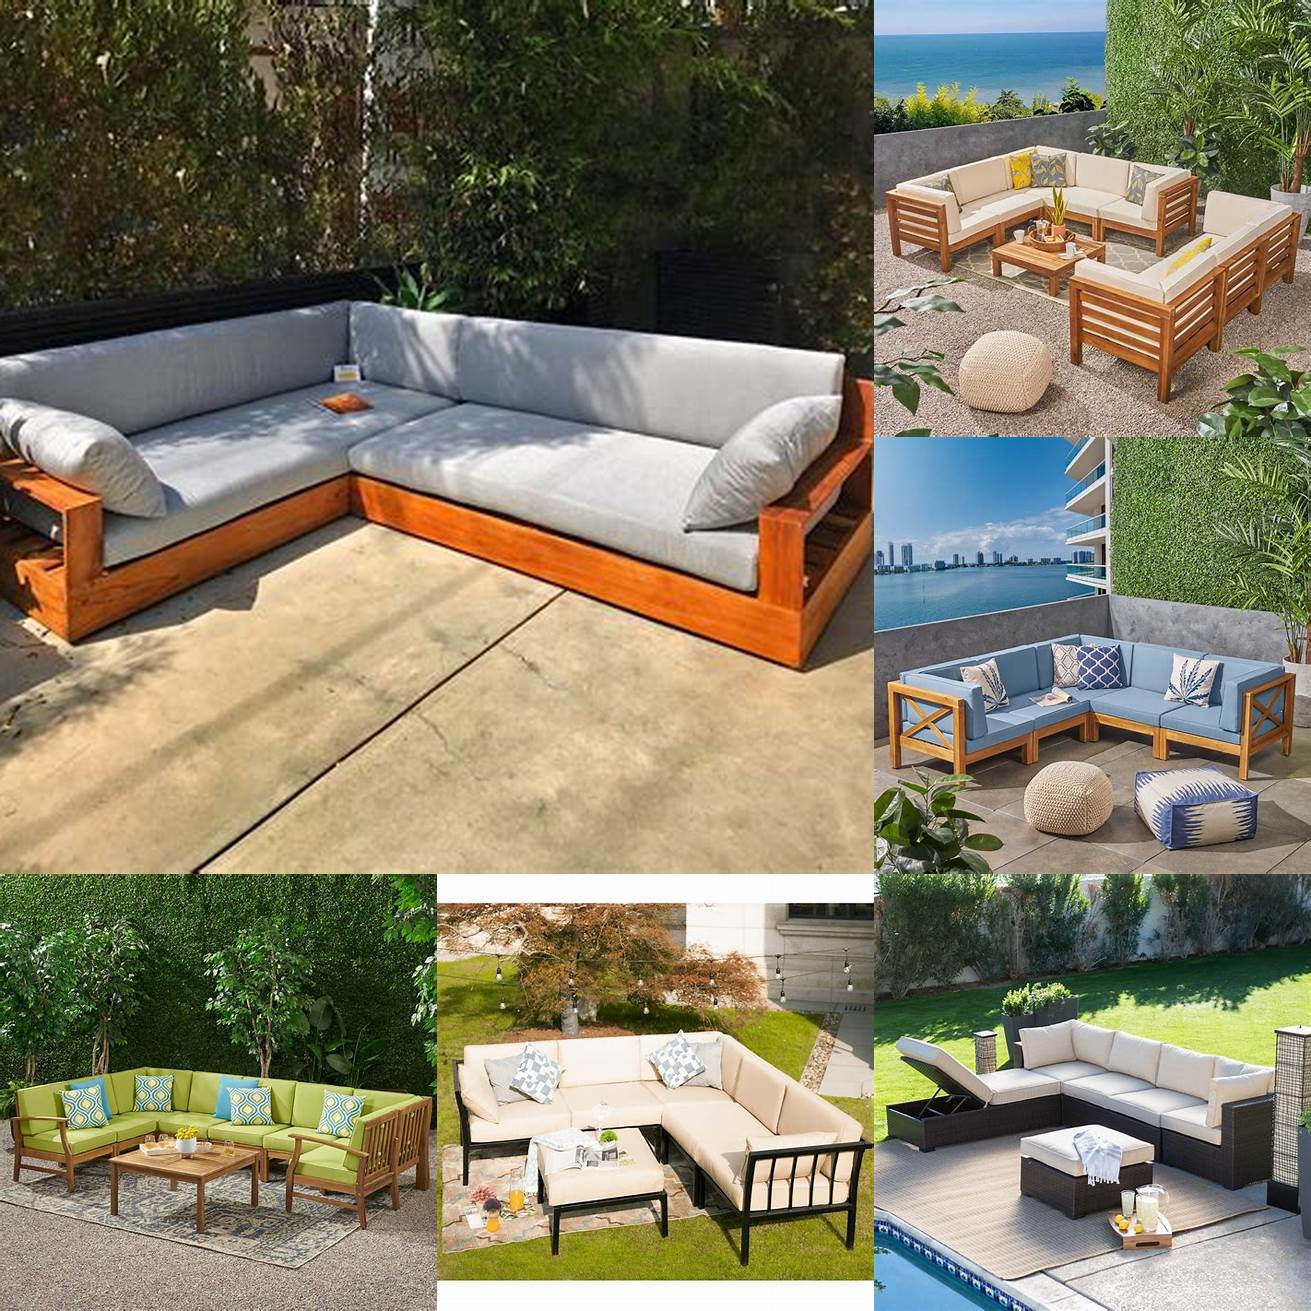 6 Teak outdoor furniture sectional deep cushions in a modern home